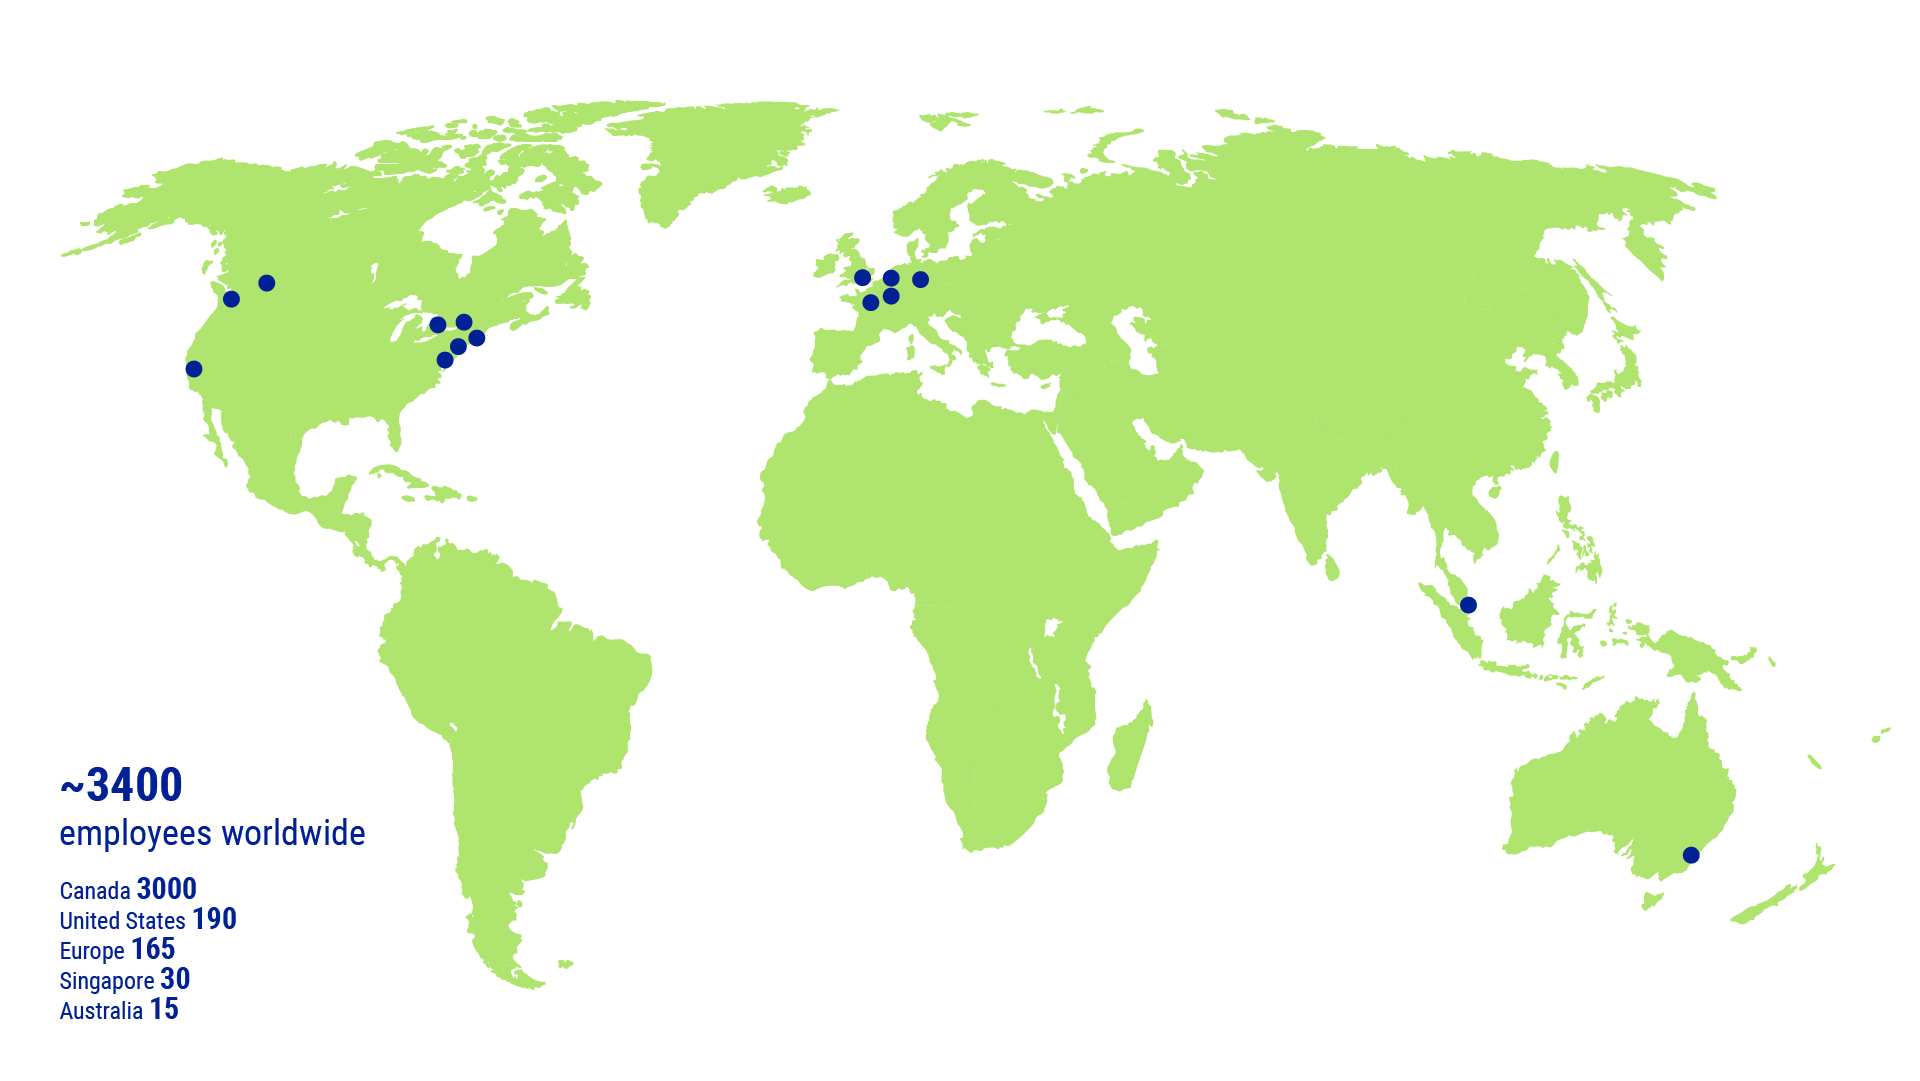 A map of the world showing dots where we have office locations with over 3400 employees worldwide - Canada 300, United States 190, Europe 165, Singapore 30, Australia 15